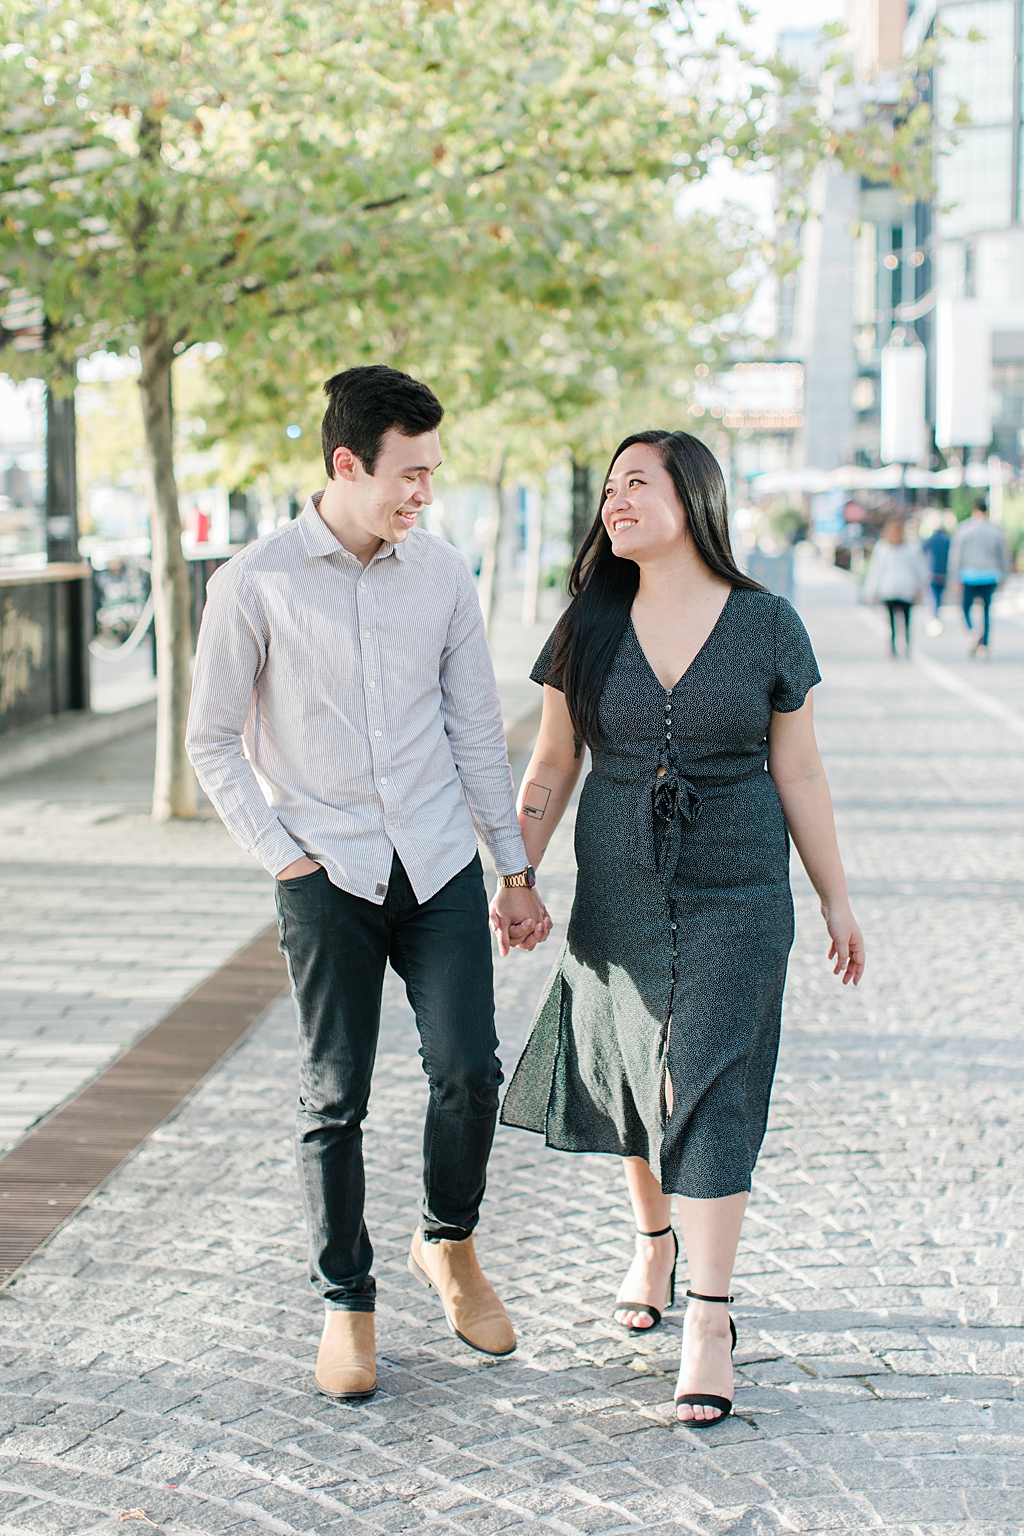 Becky_Collin_Navy_Yards_Park_The_Wharf_Washington_DC_Fall_Engagement_Session_AngelikaJohnsPhotography-7574.jpg